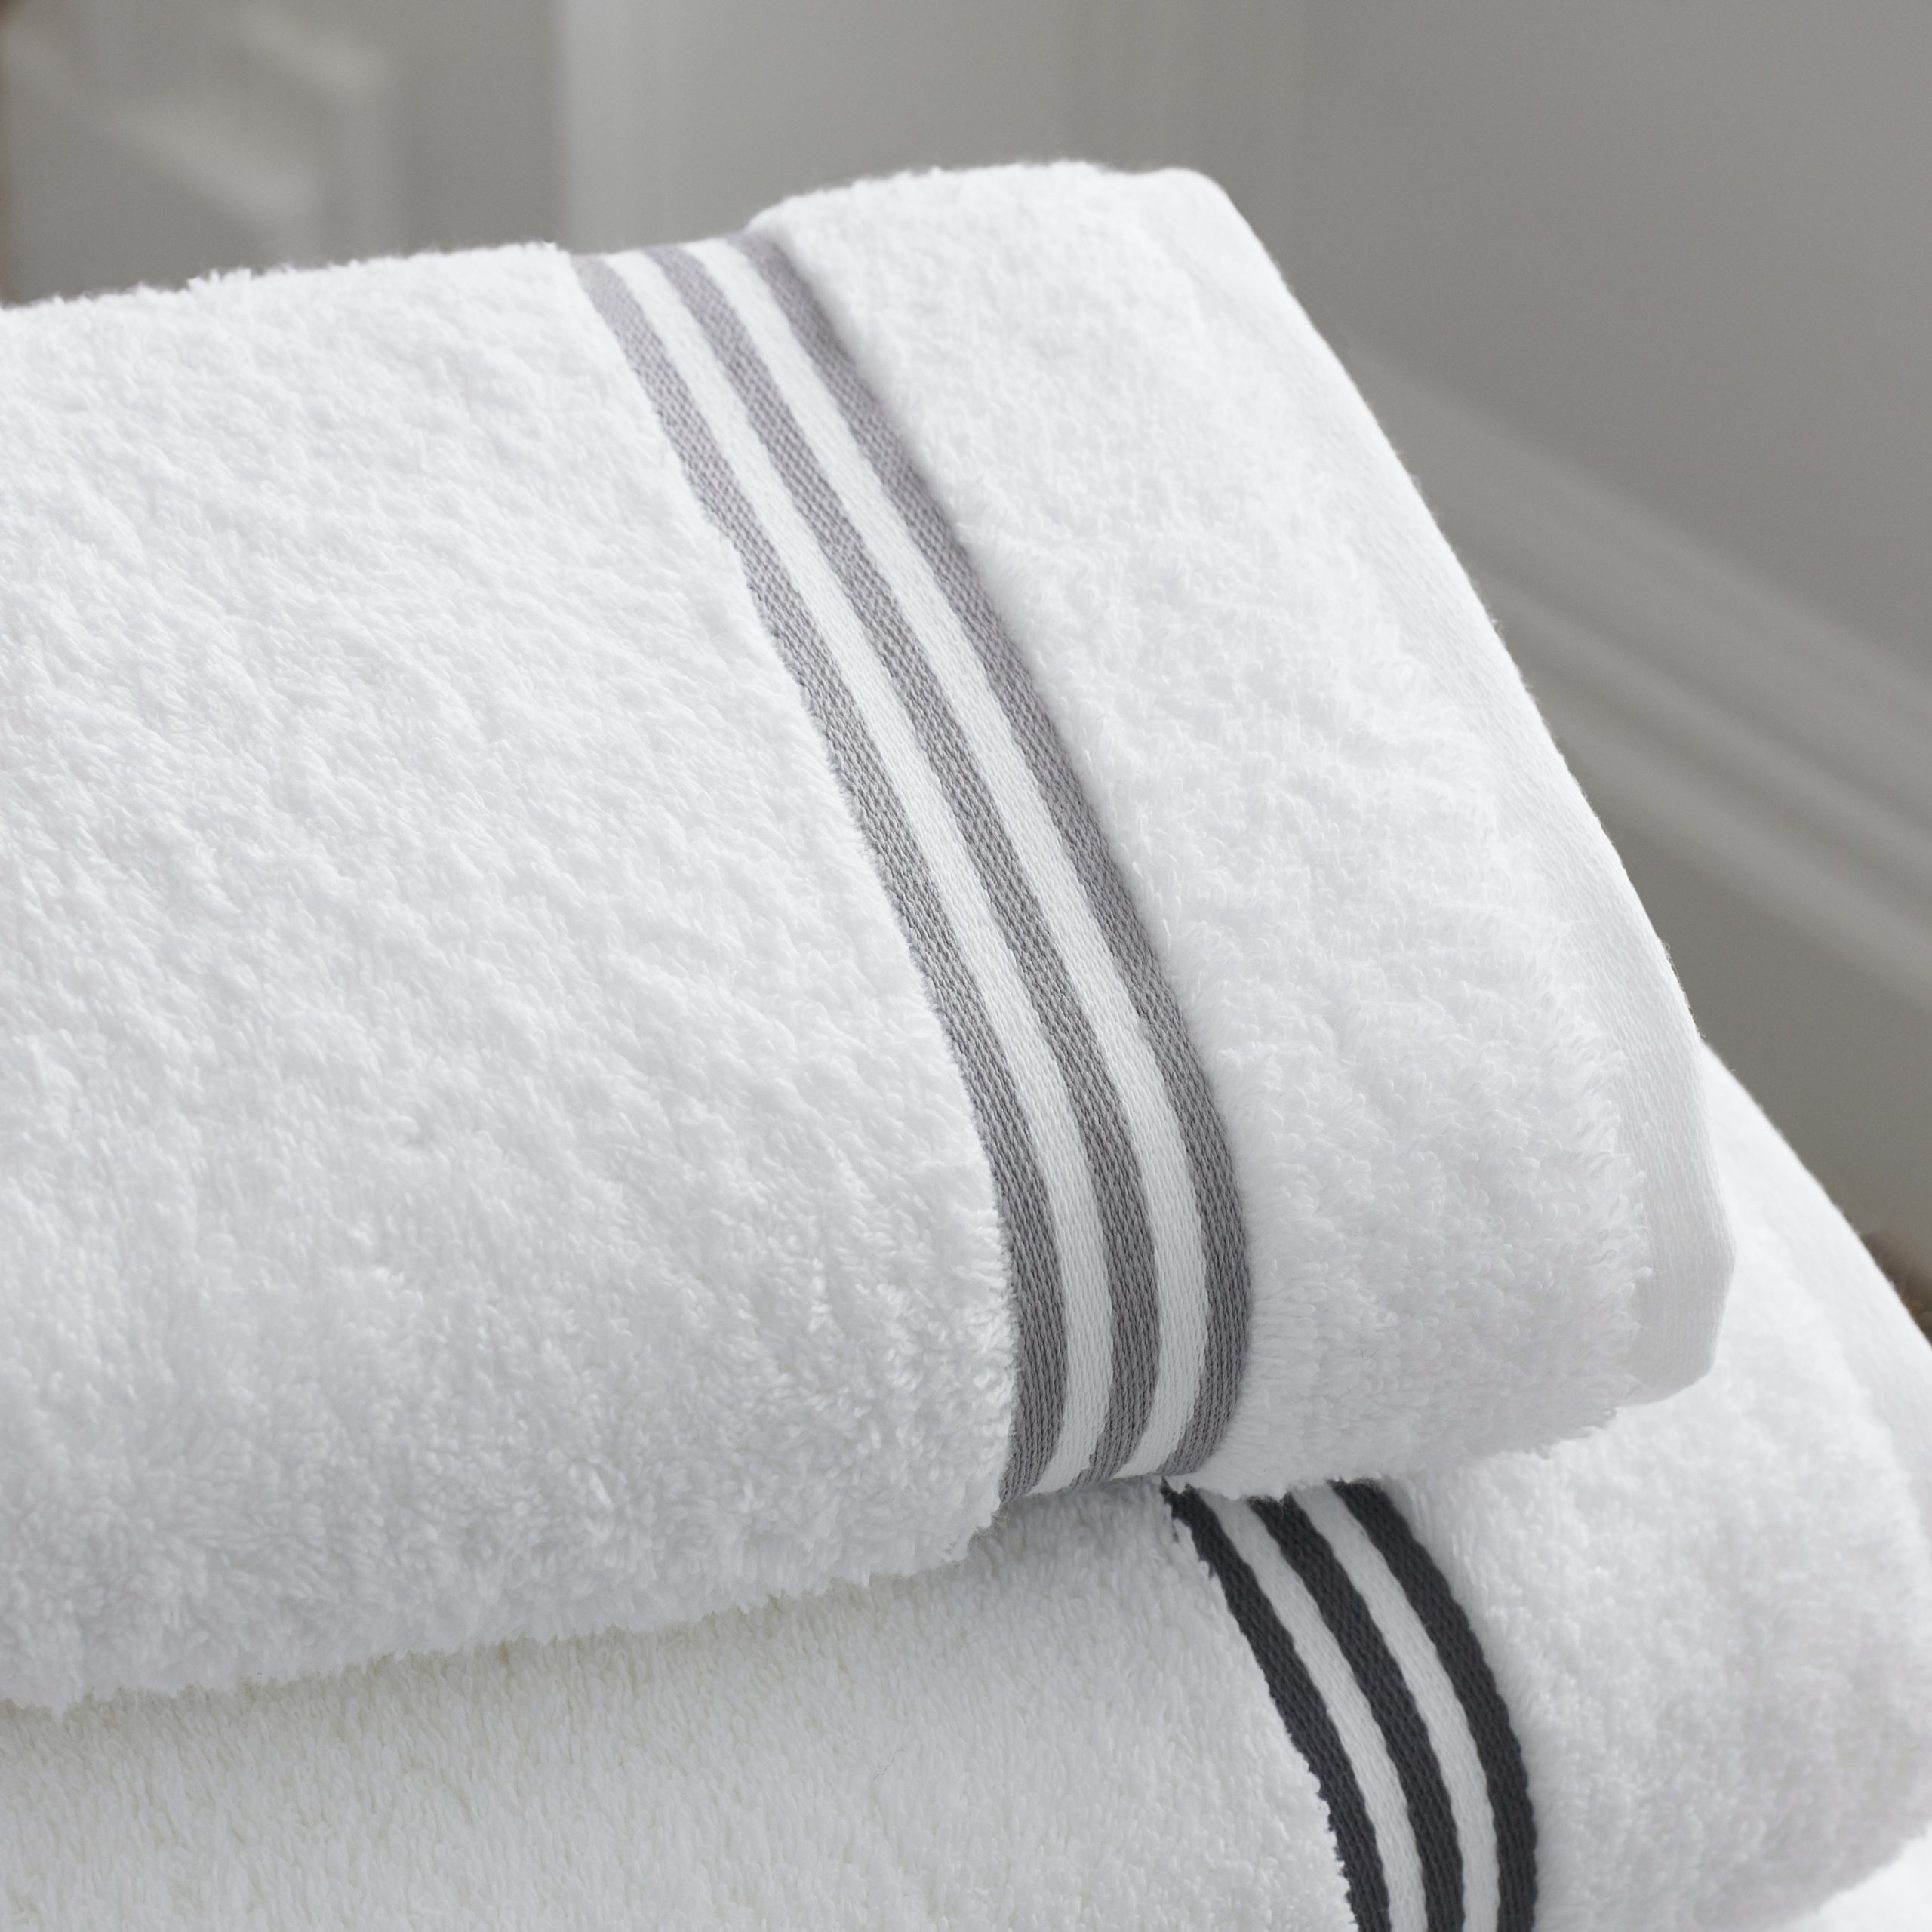 Towel Laundry Service In London